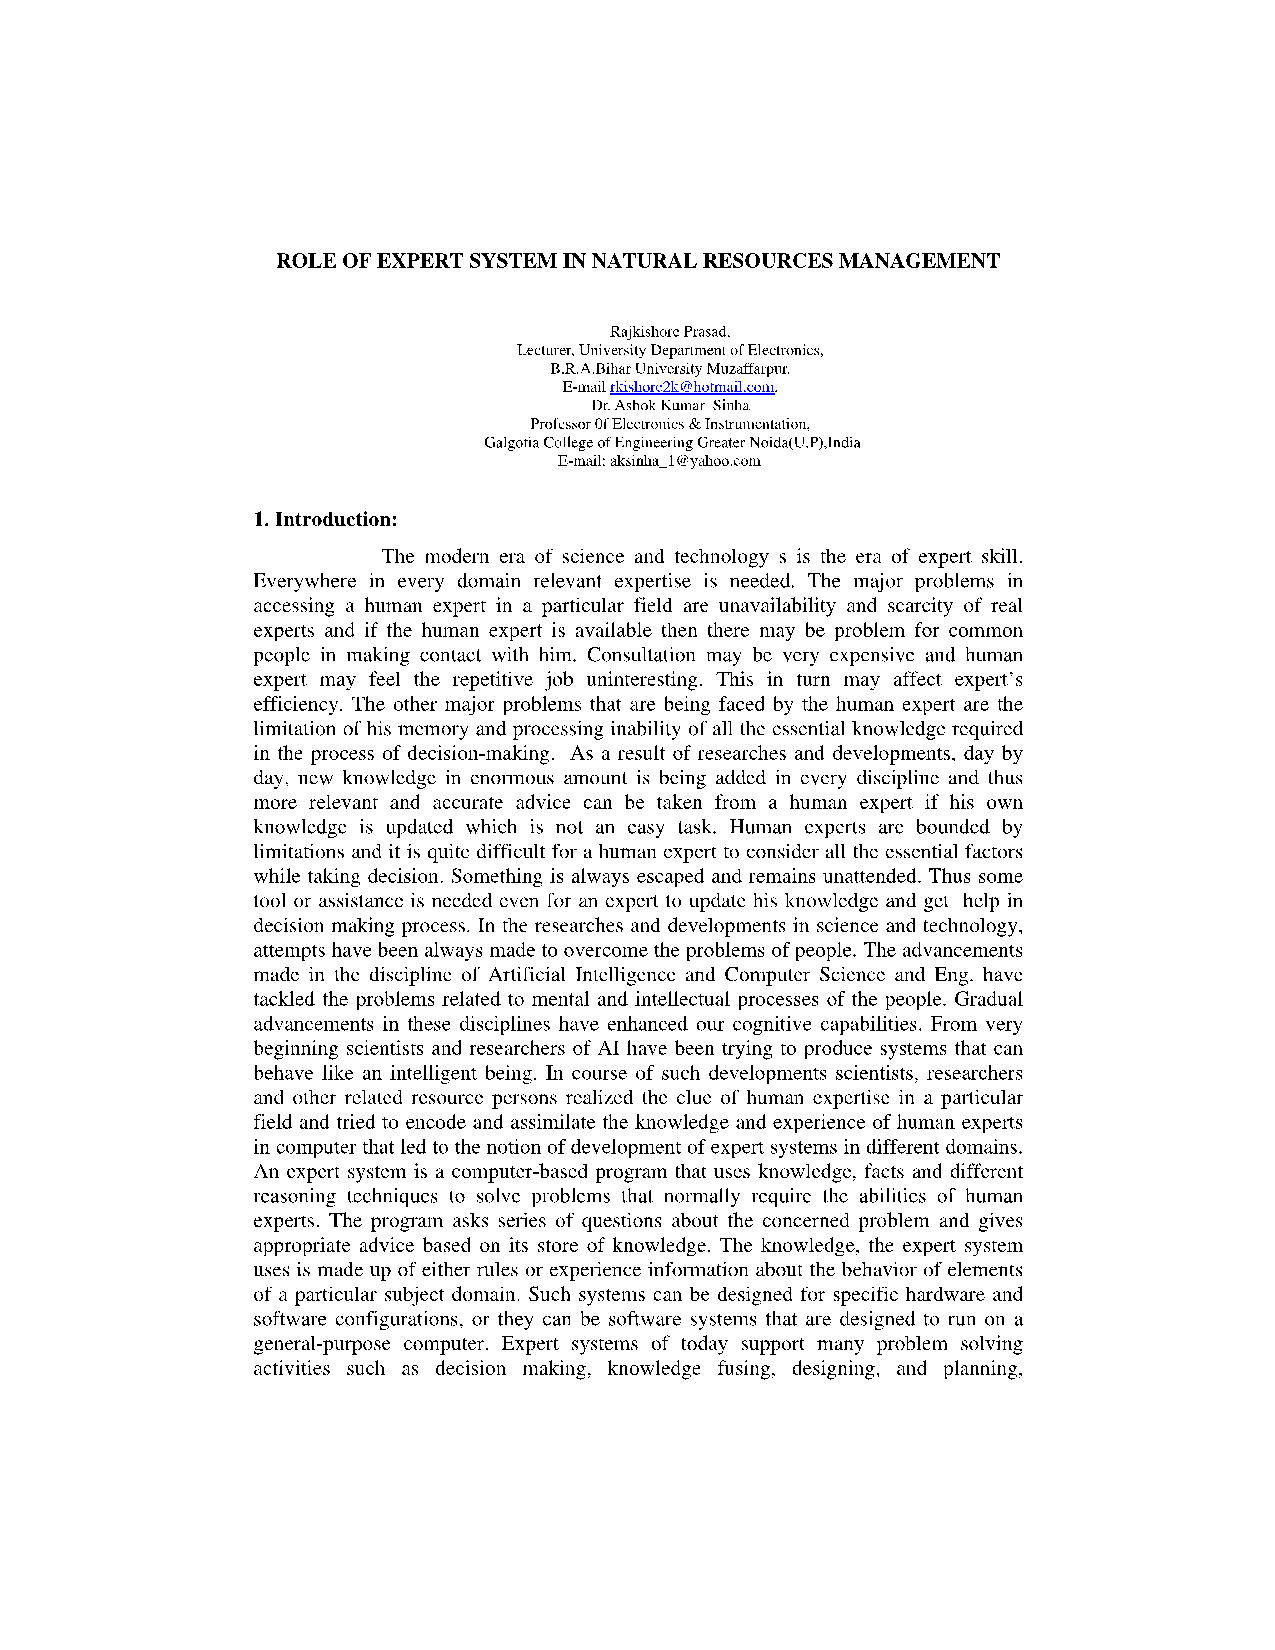 ROLE OF EXPERT SYSTEM IN NATURAL RESOURCES MANAGEMENT 9